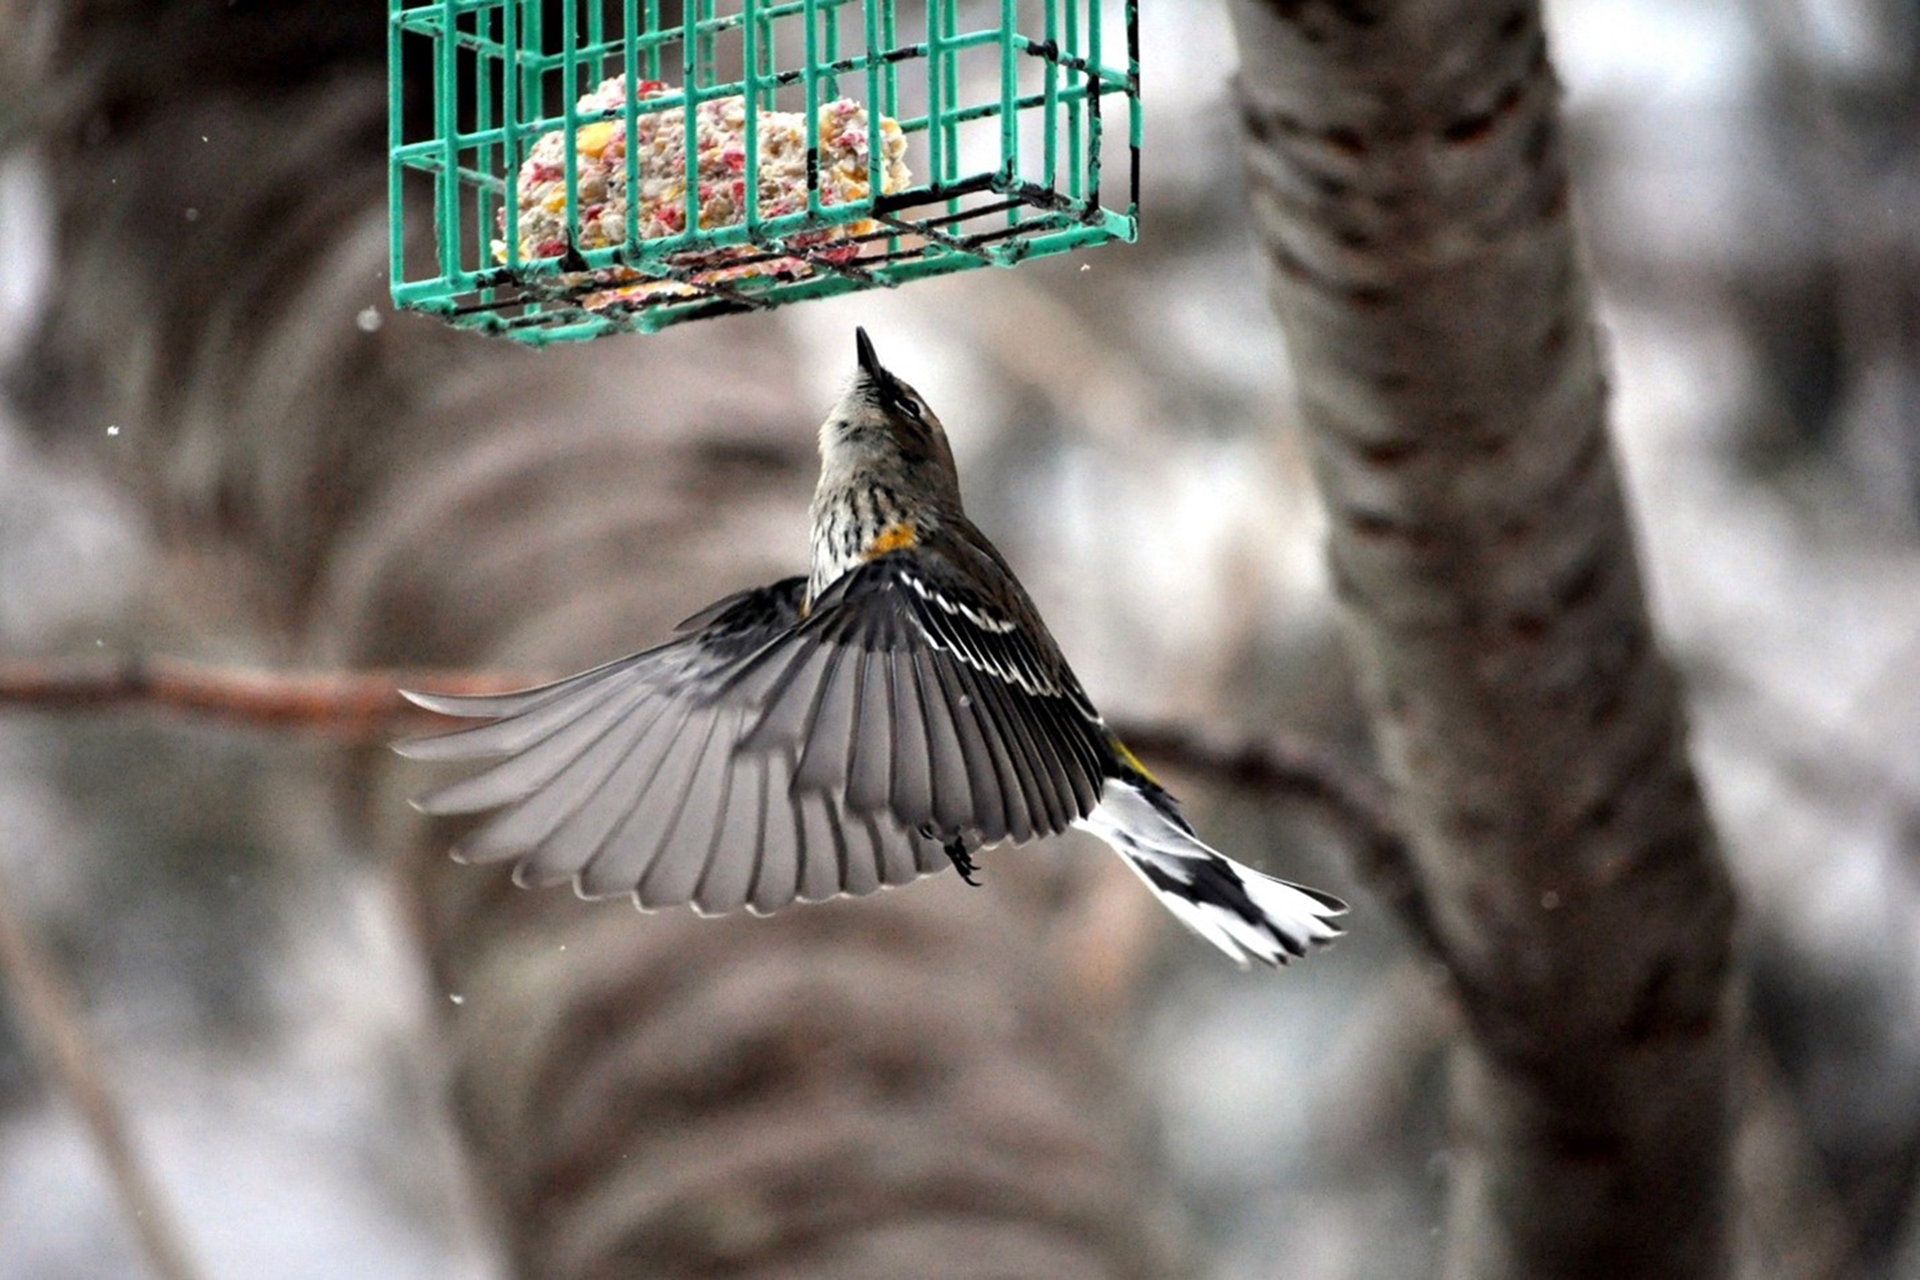 Bird eating seed from a suet cage midflight